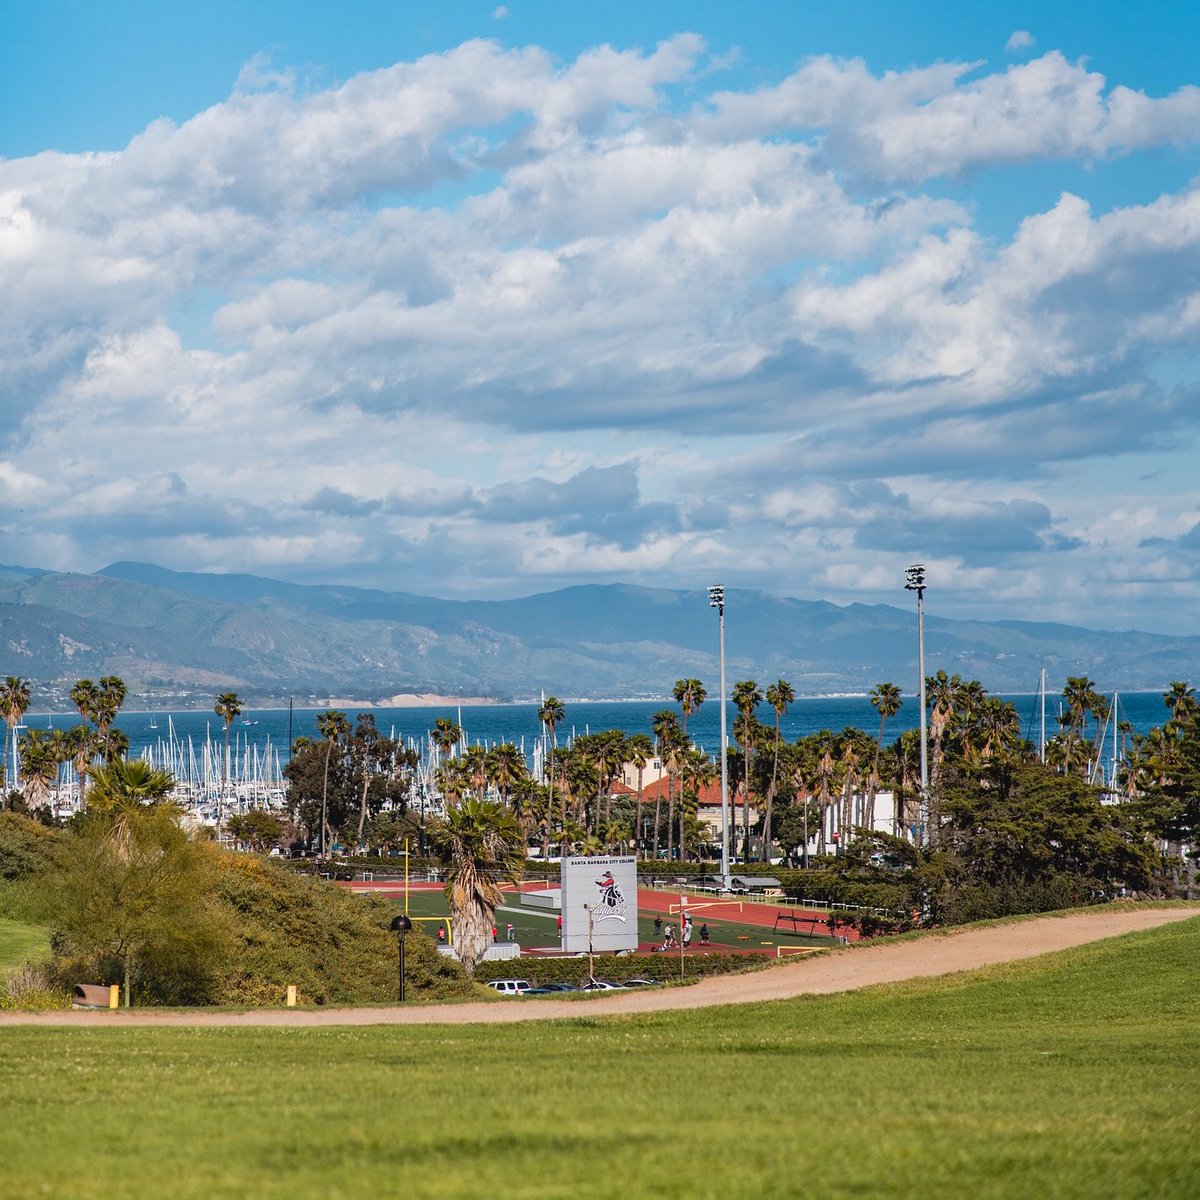 Vaqueros! We hope you are having a relaxing Spring Break! We look forward to seeing you back on-campus on Monday, April 1st, but until then enjoy the beautiful Santa Barbara weather ☀️